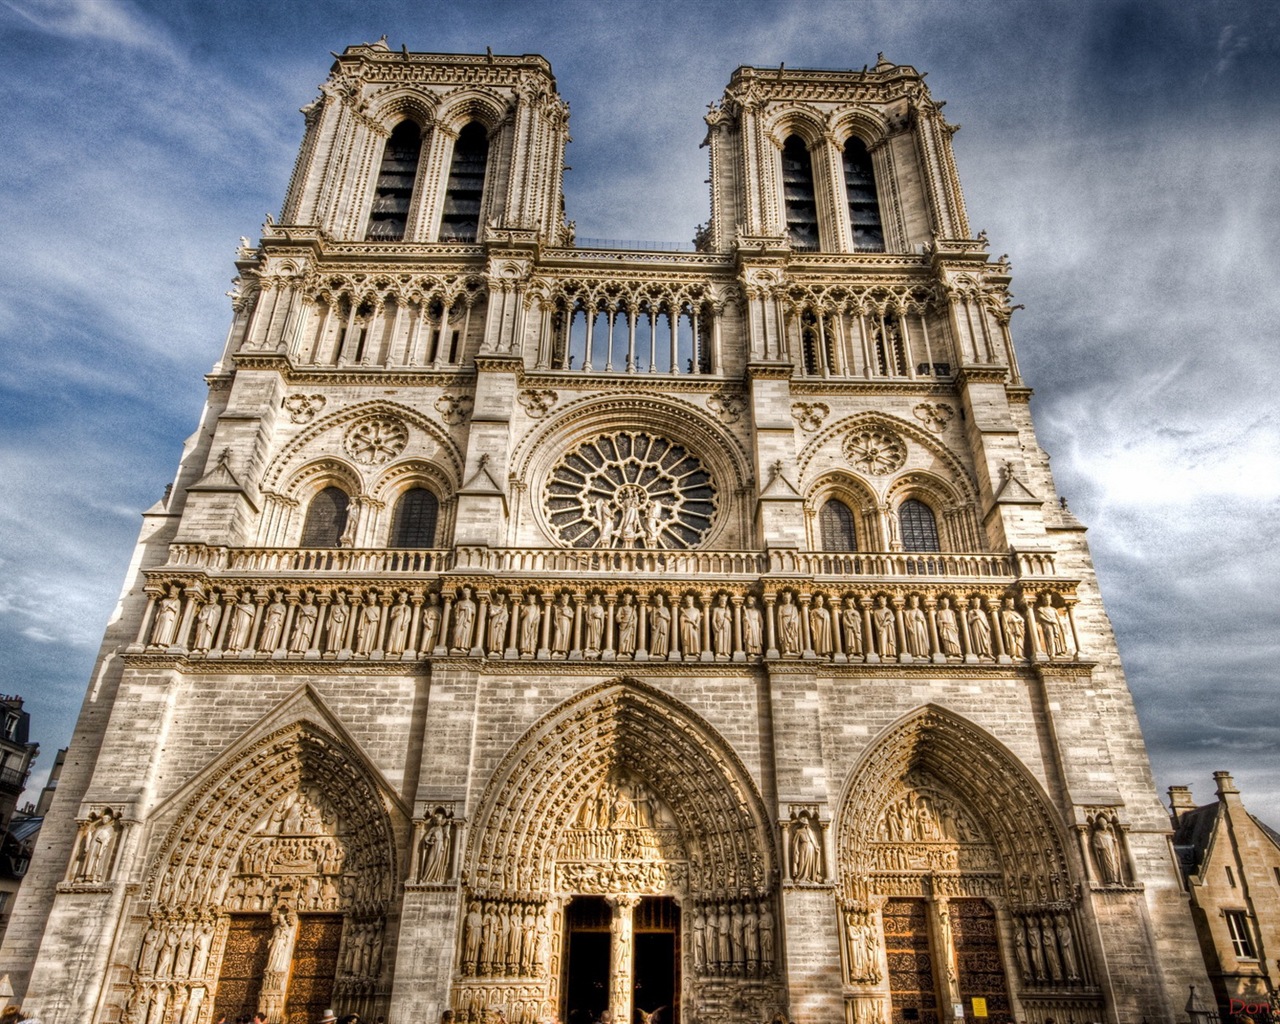 Notre Dame HD Wallpapers #14 - 1280x1024